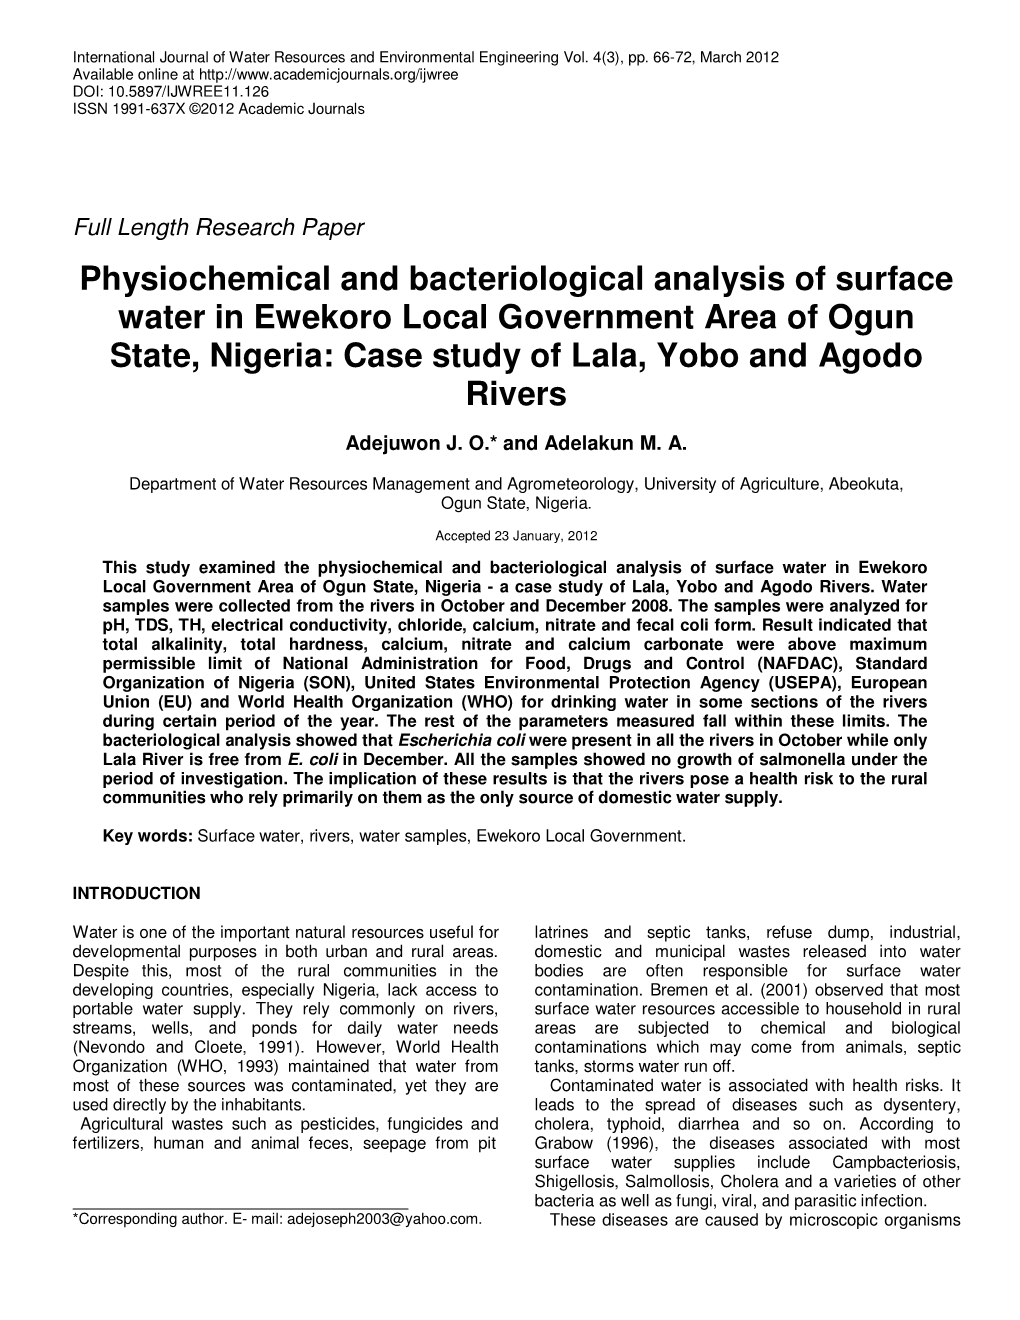 Physiochemical and Bacteriological Analysis of Surface Water in Ewekoro Local Government Area of Ogun State, Nigeria: Case Study of Lala, Yobo and Agodo Rivers